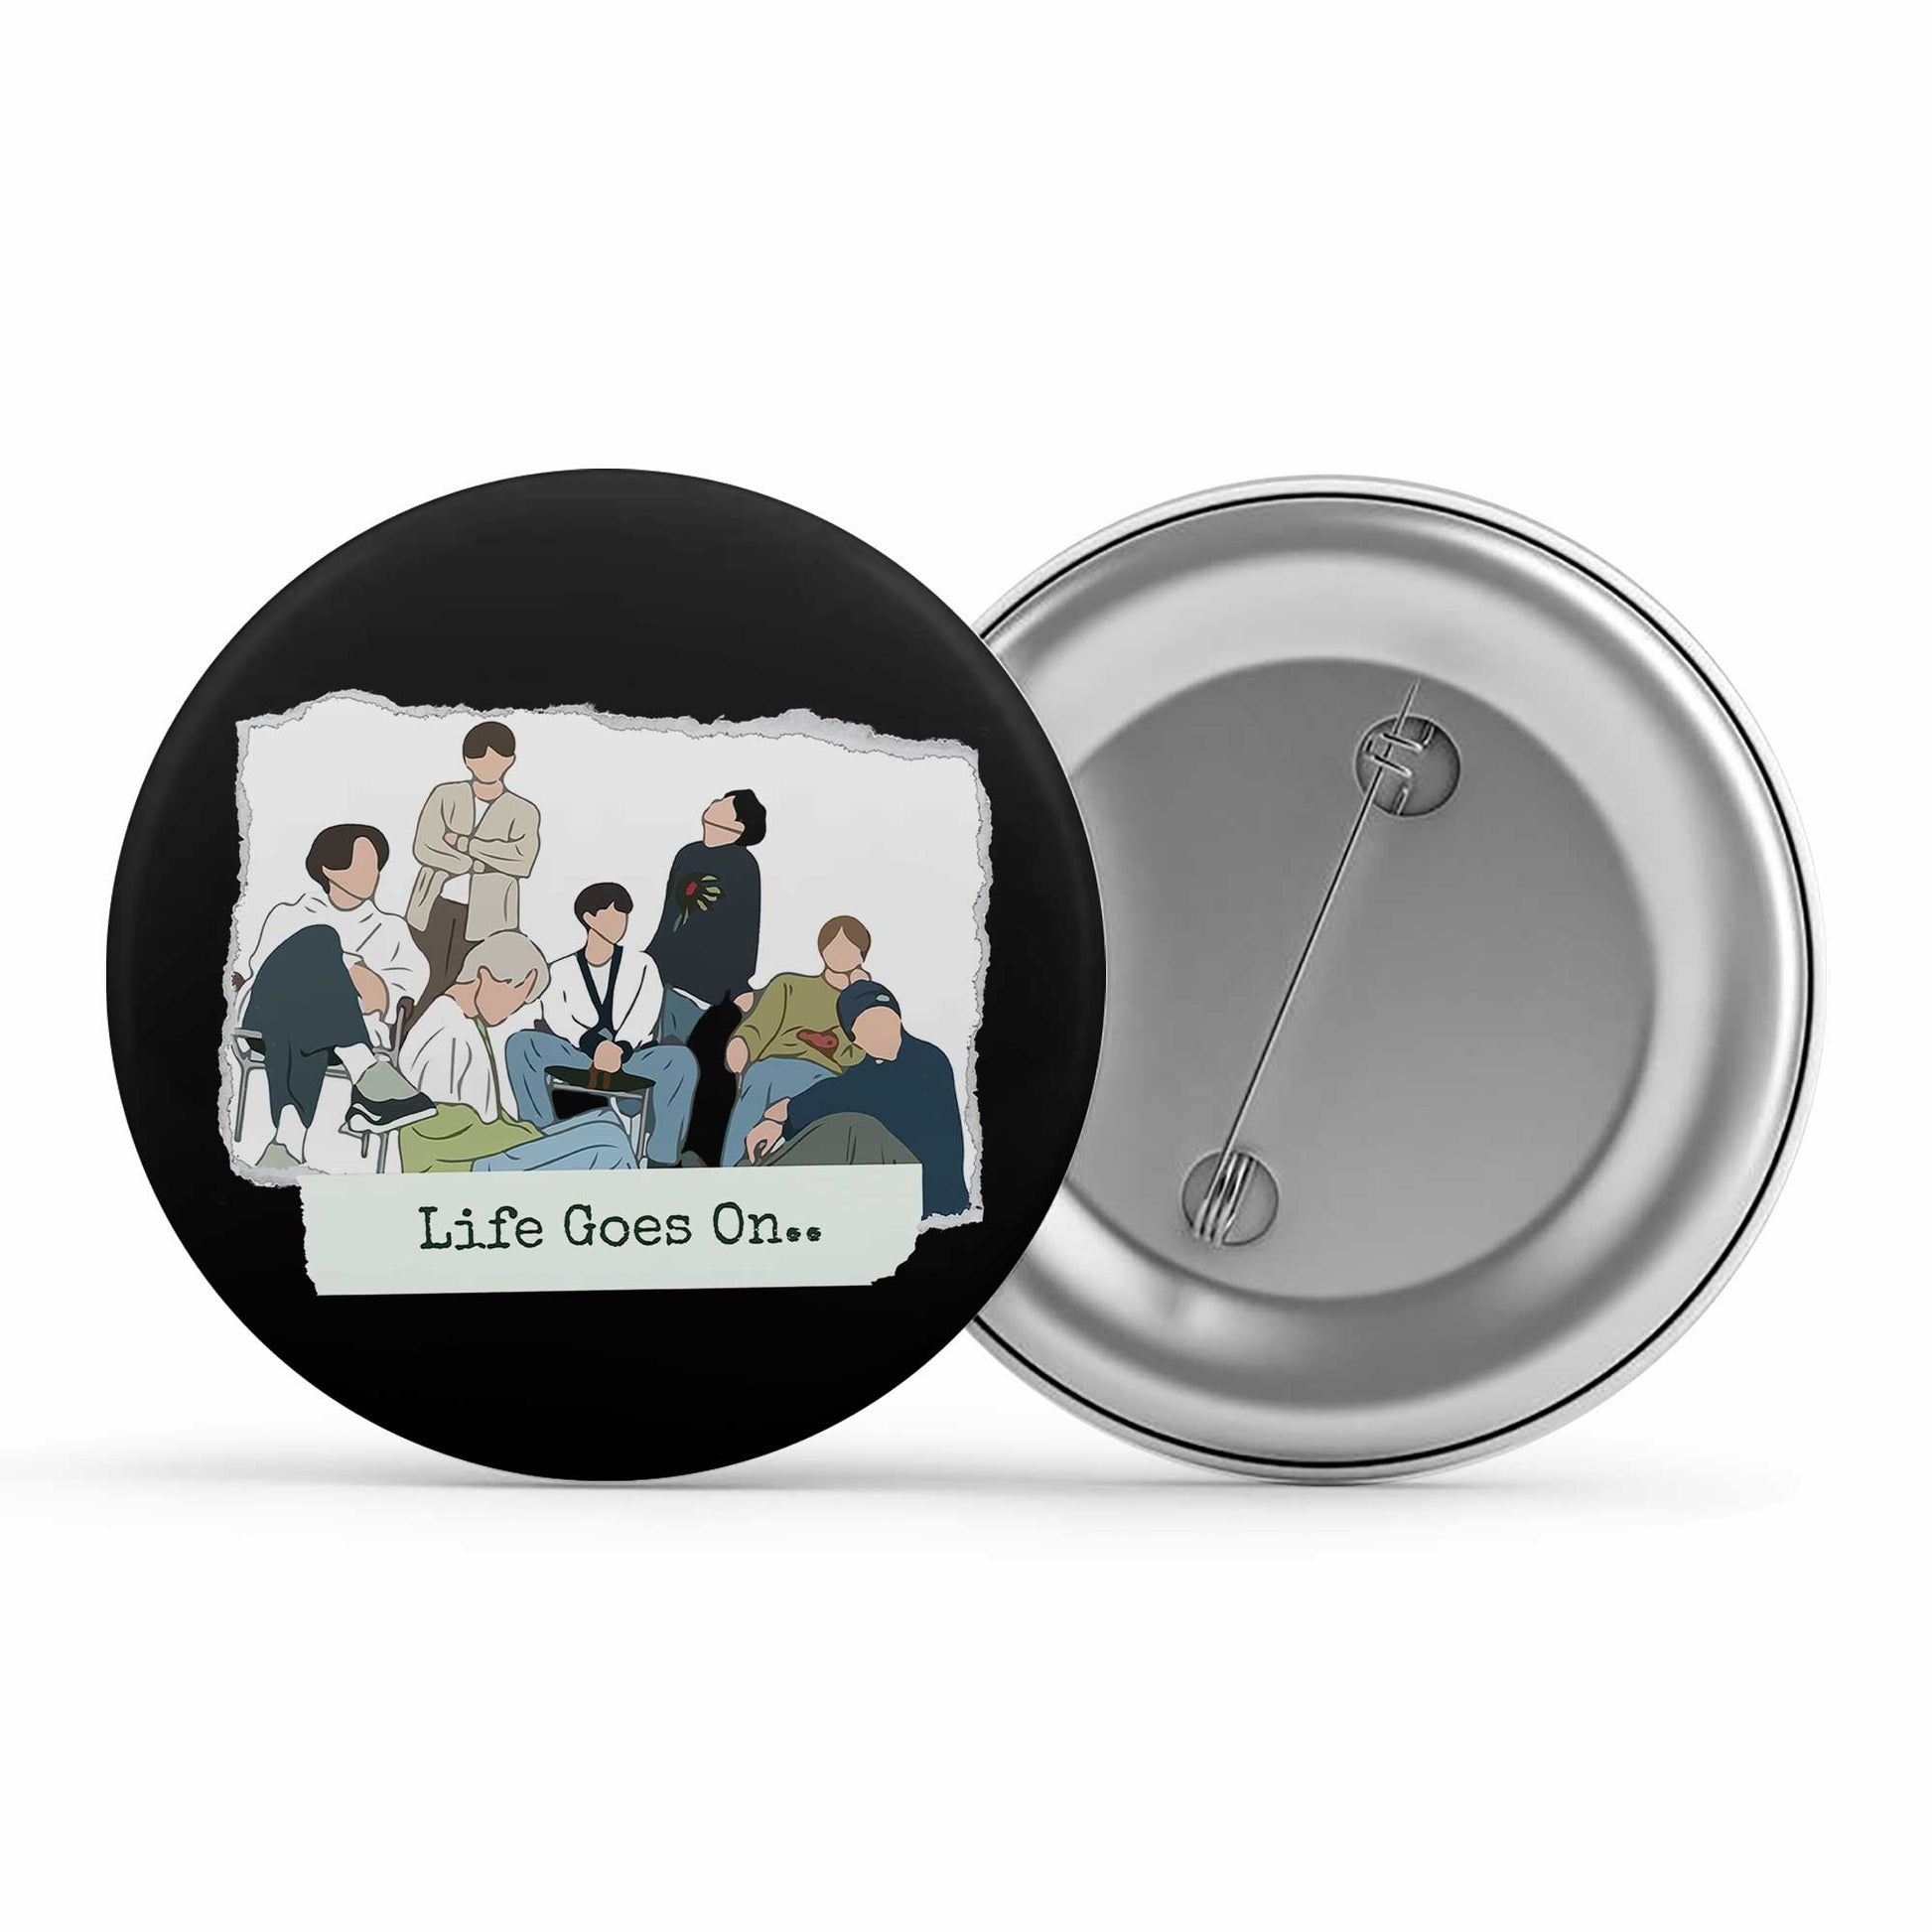 bts life goes on badge pin button music band buy online india the banyan tee tbt men women girls boys unisex  